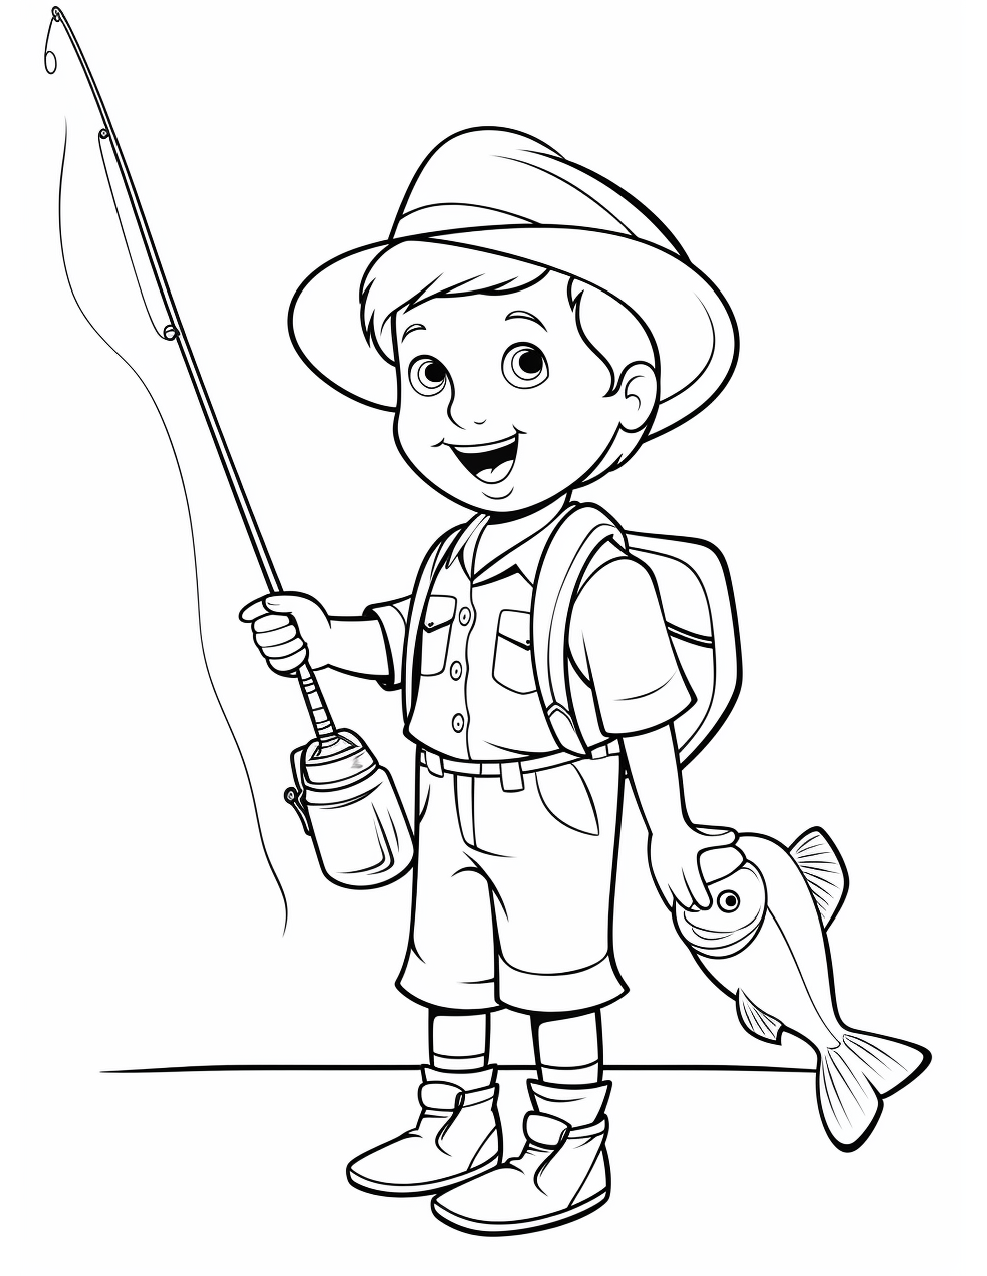 Skip to my Lou - Fishing Coloring Pages - Line drawing of a boy holding a fishing rod and a fish